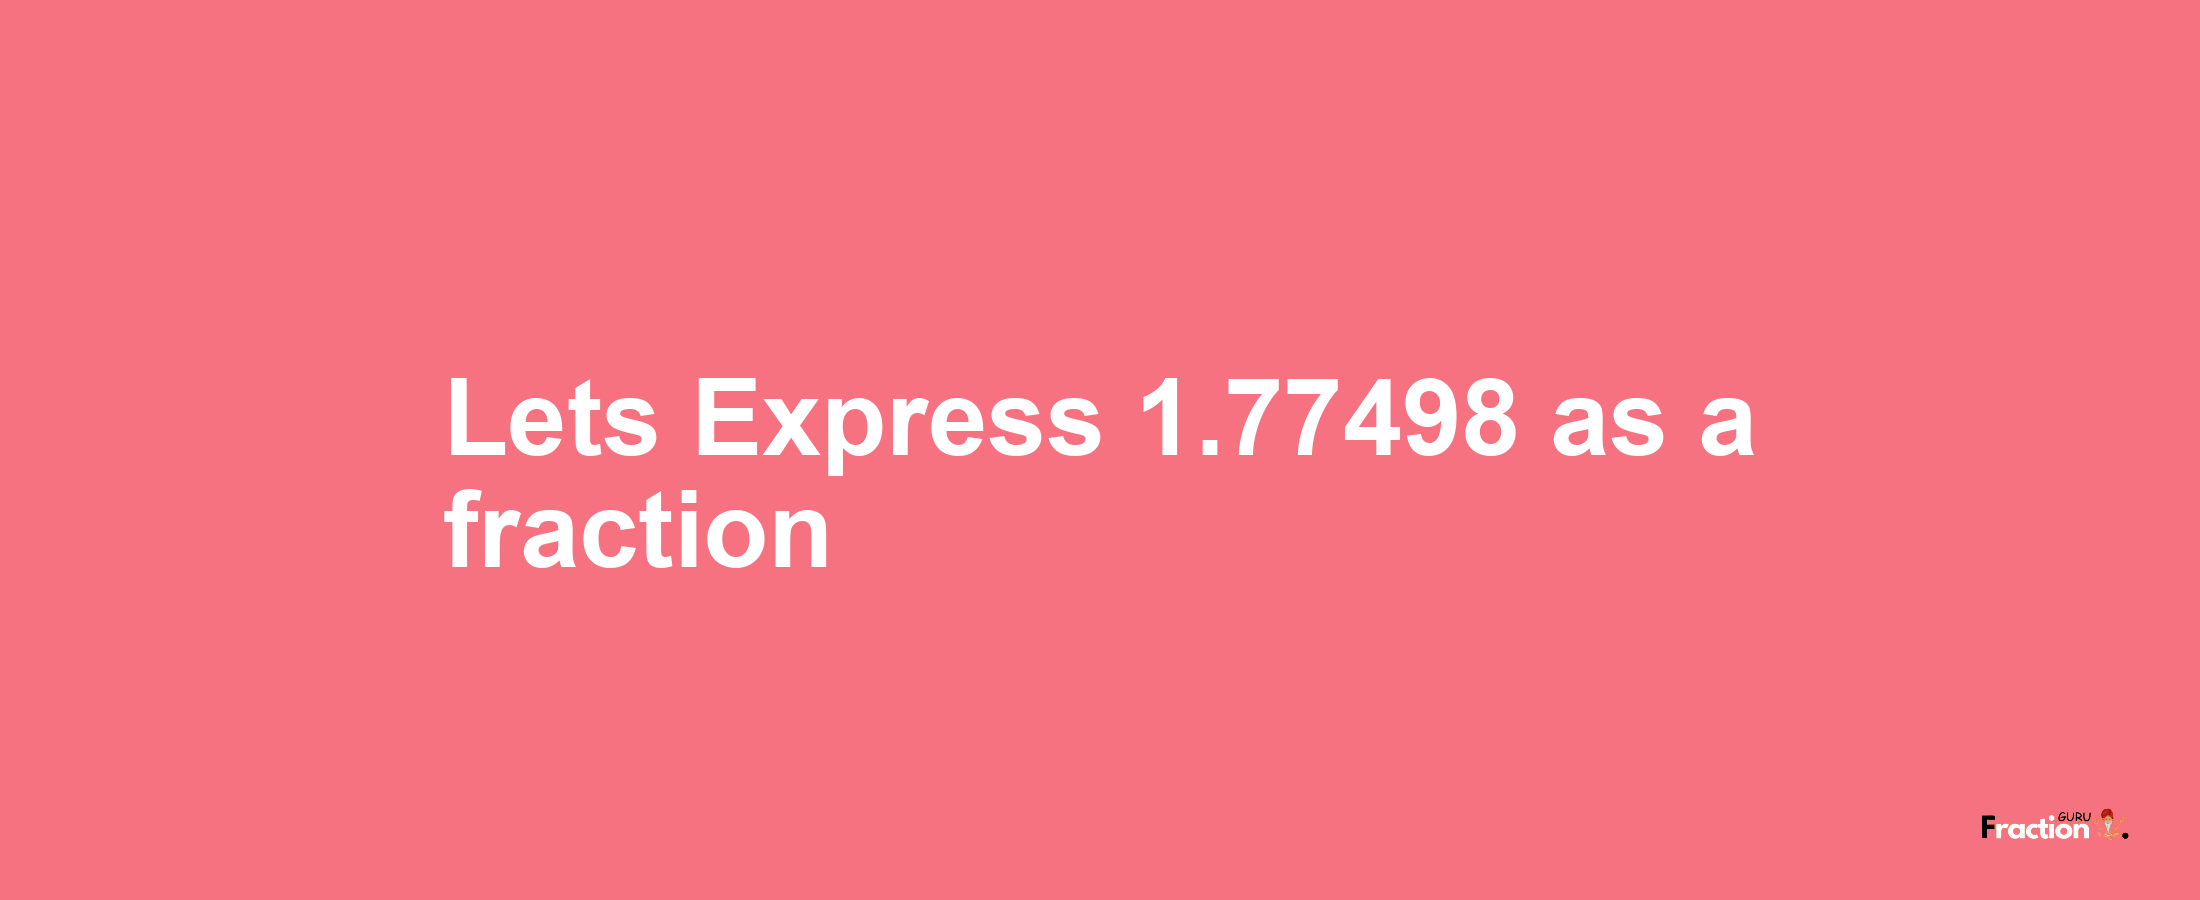 Lets Express 1.77498 as afraction